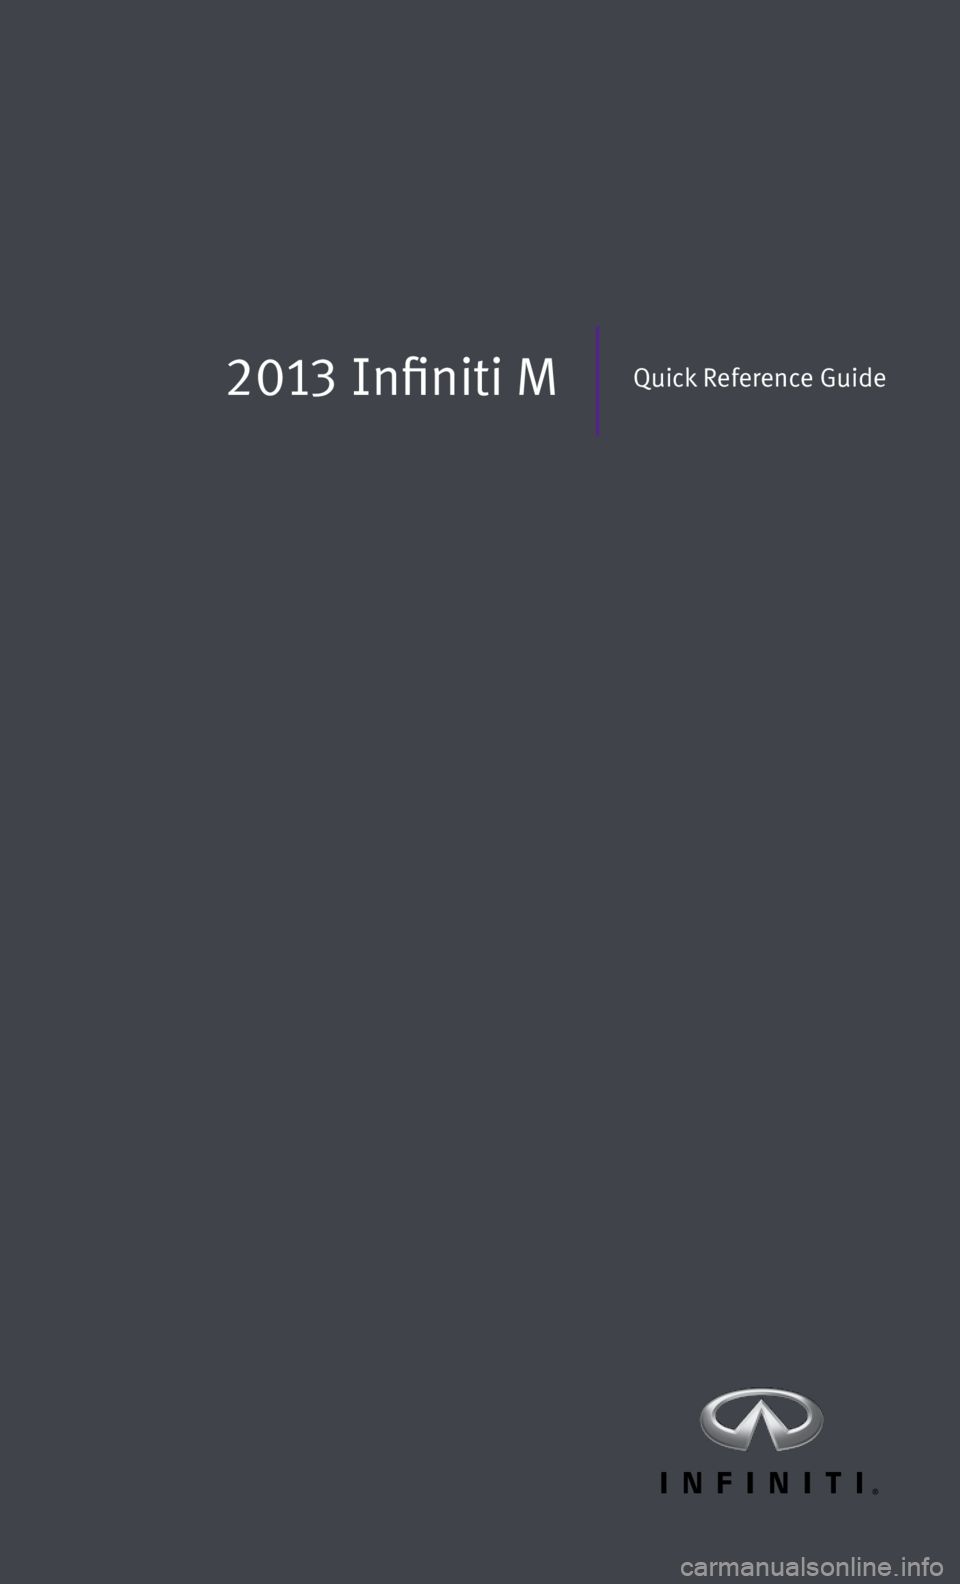 INFINITI M 2013  Quick Reference Guide 2013 Infiniti MQuick Reference Guide 